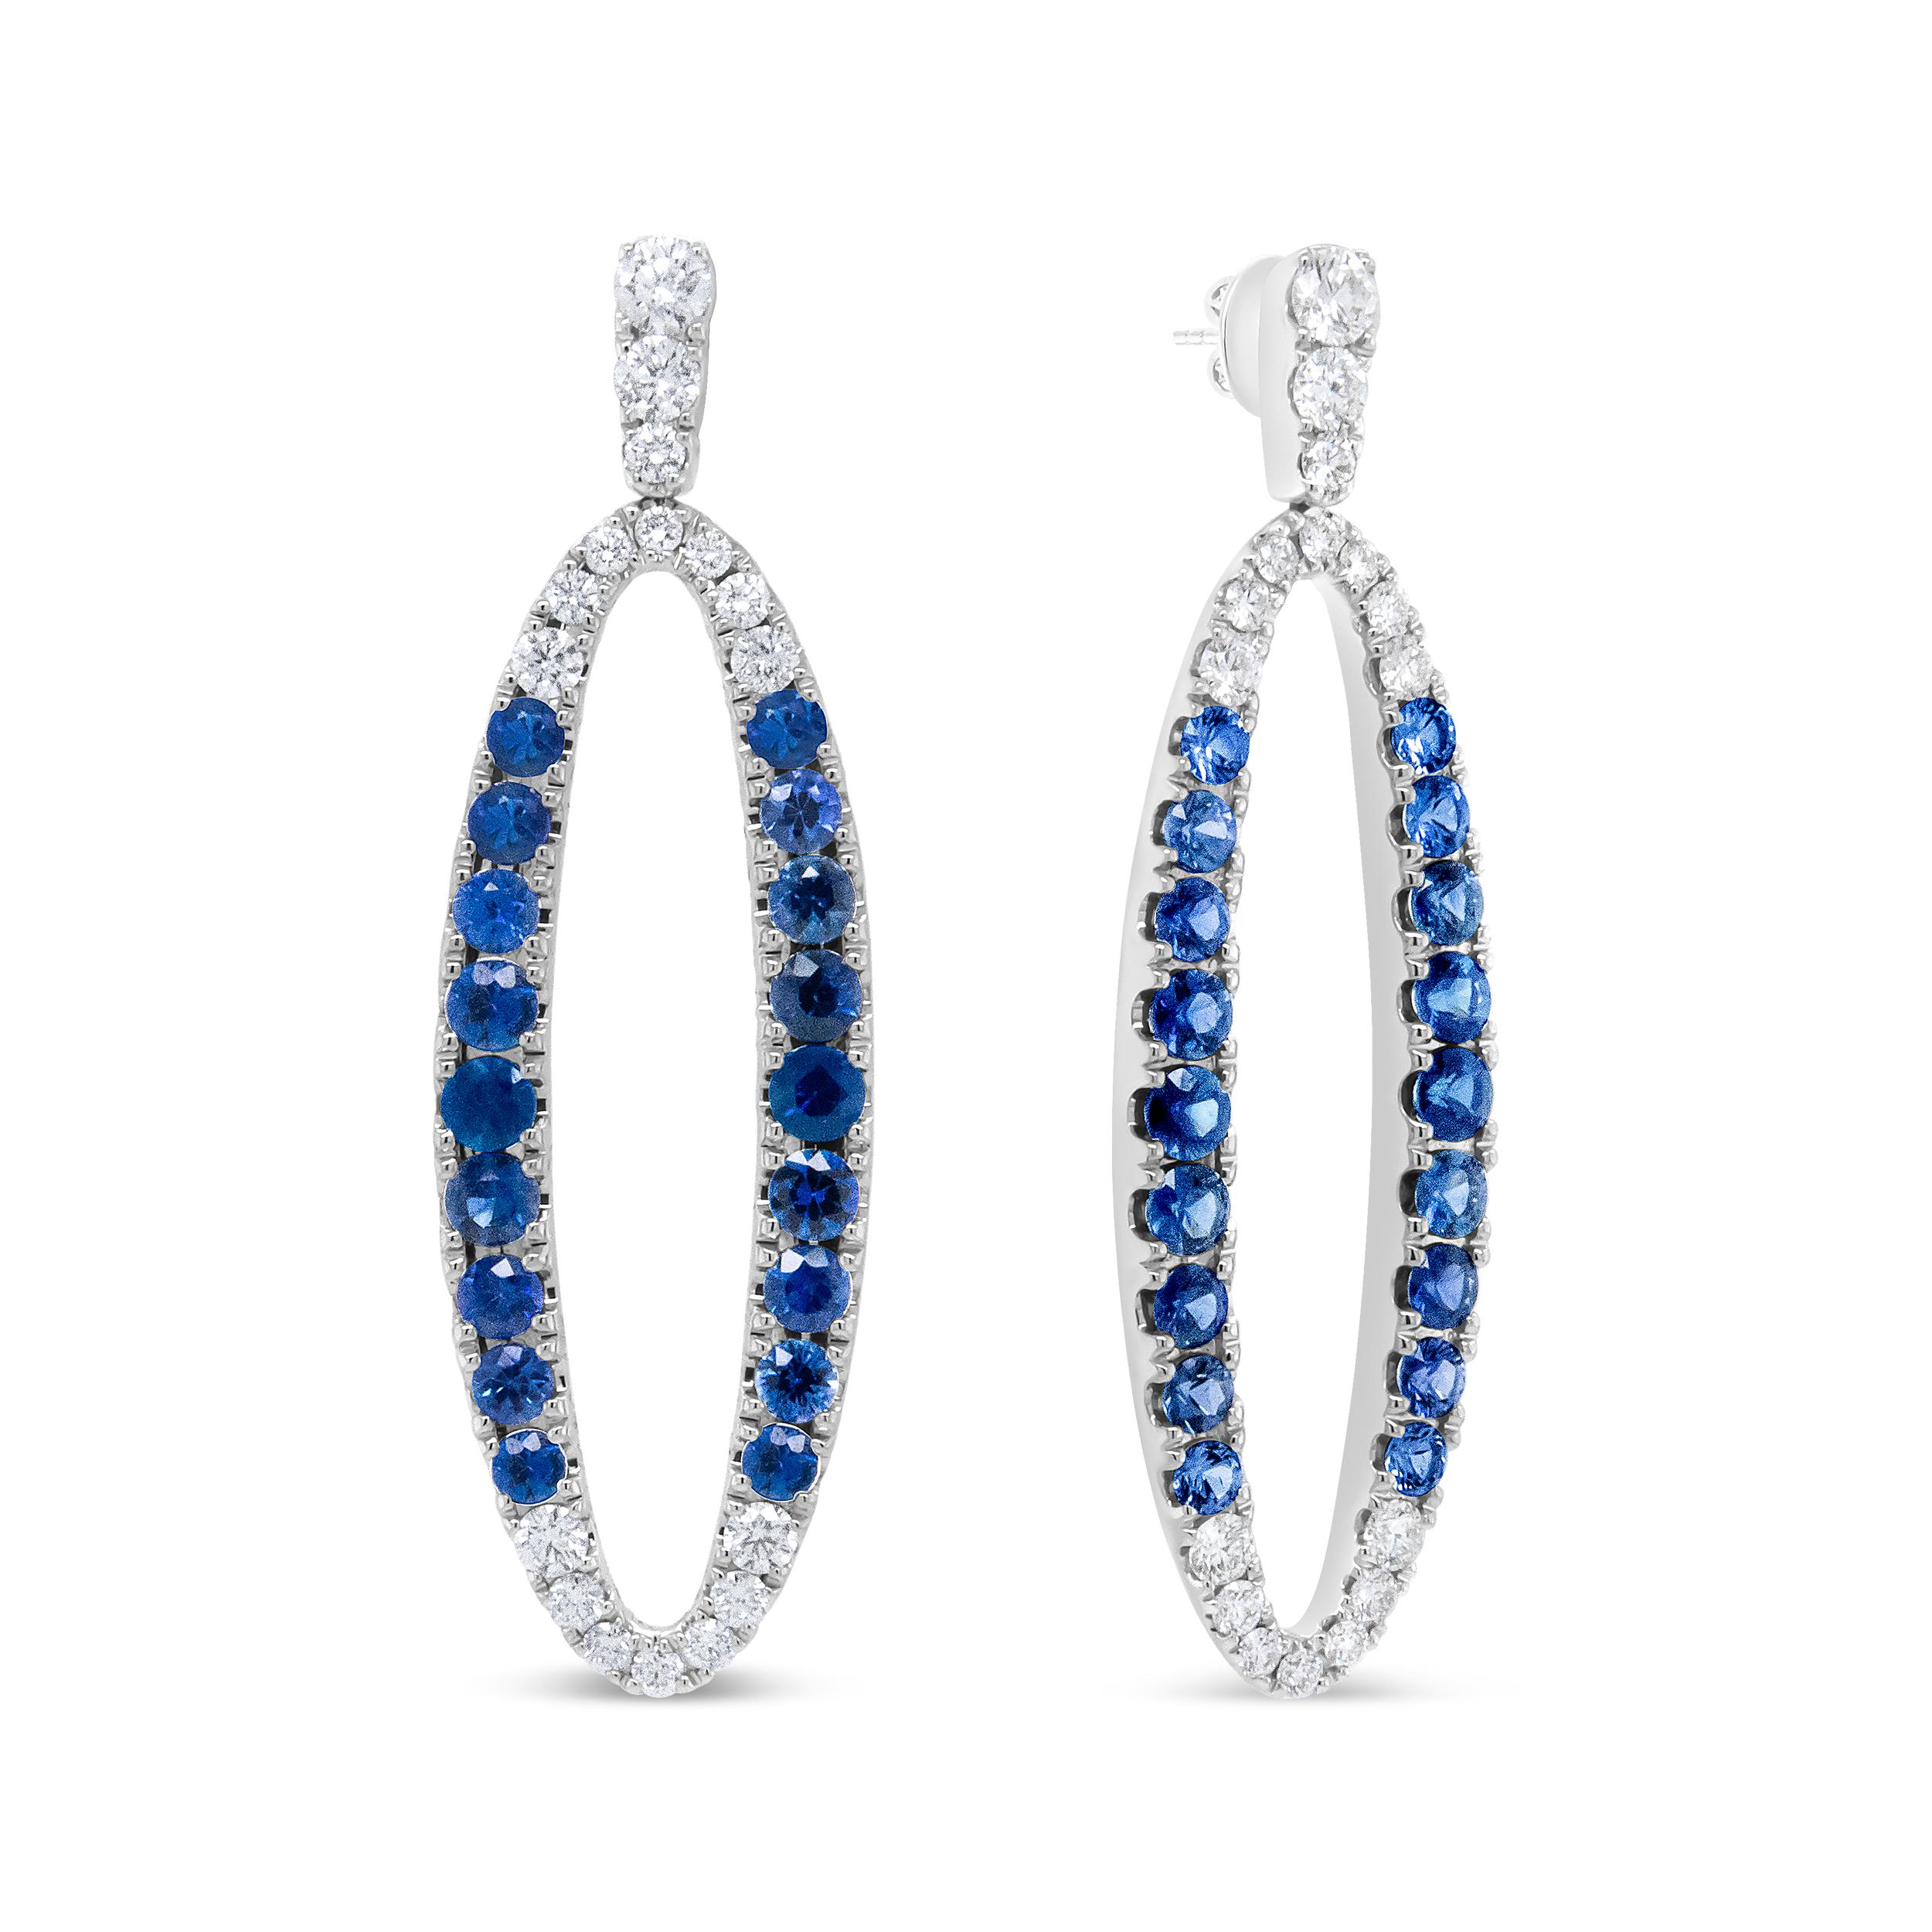 A brilliant sparkle shines supreme from these glorious 18k white gold dangle earrings. An openwork oval hoop silhouette gives this pair a chic, contemporary vibe. Round white diamonds run along the bail and dangle of the earrings, secured in prong